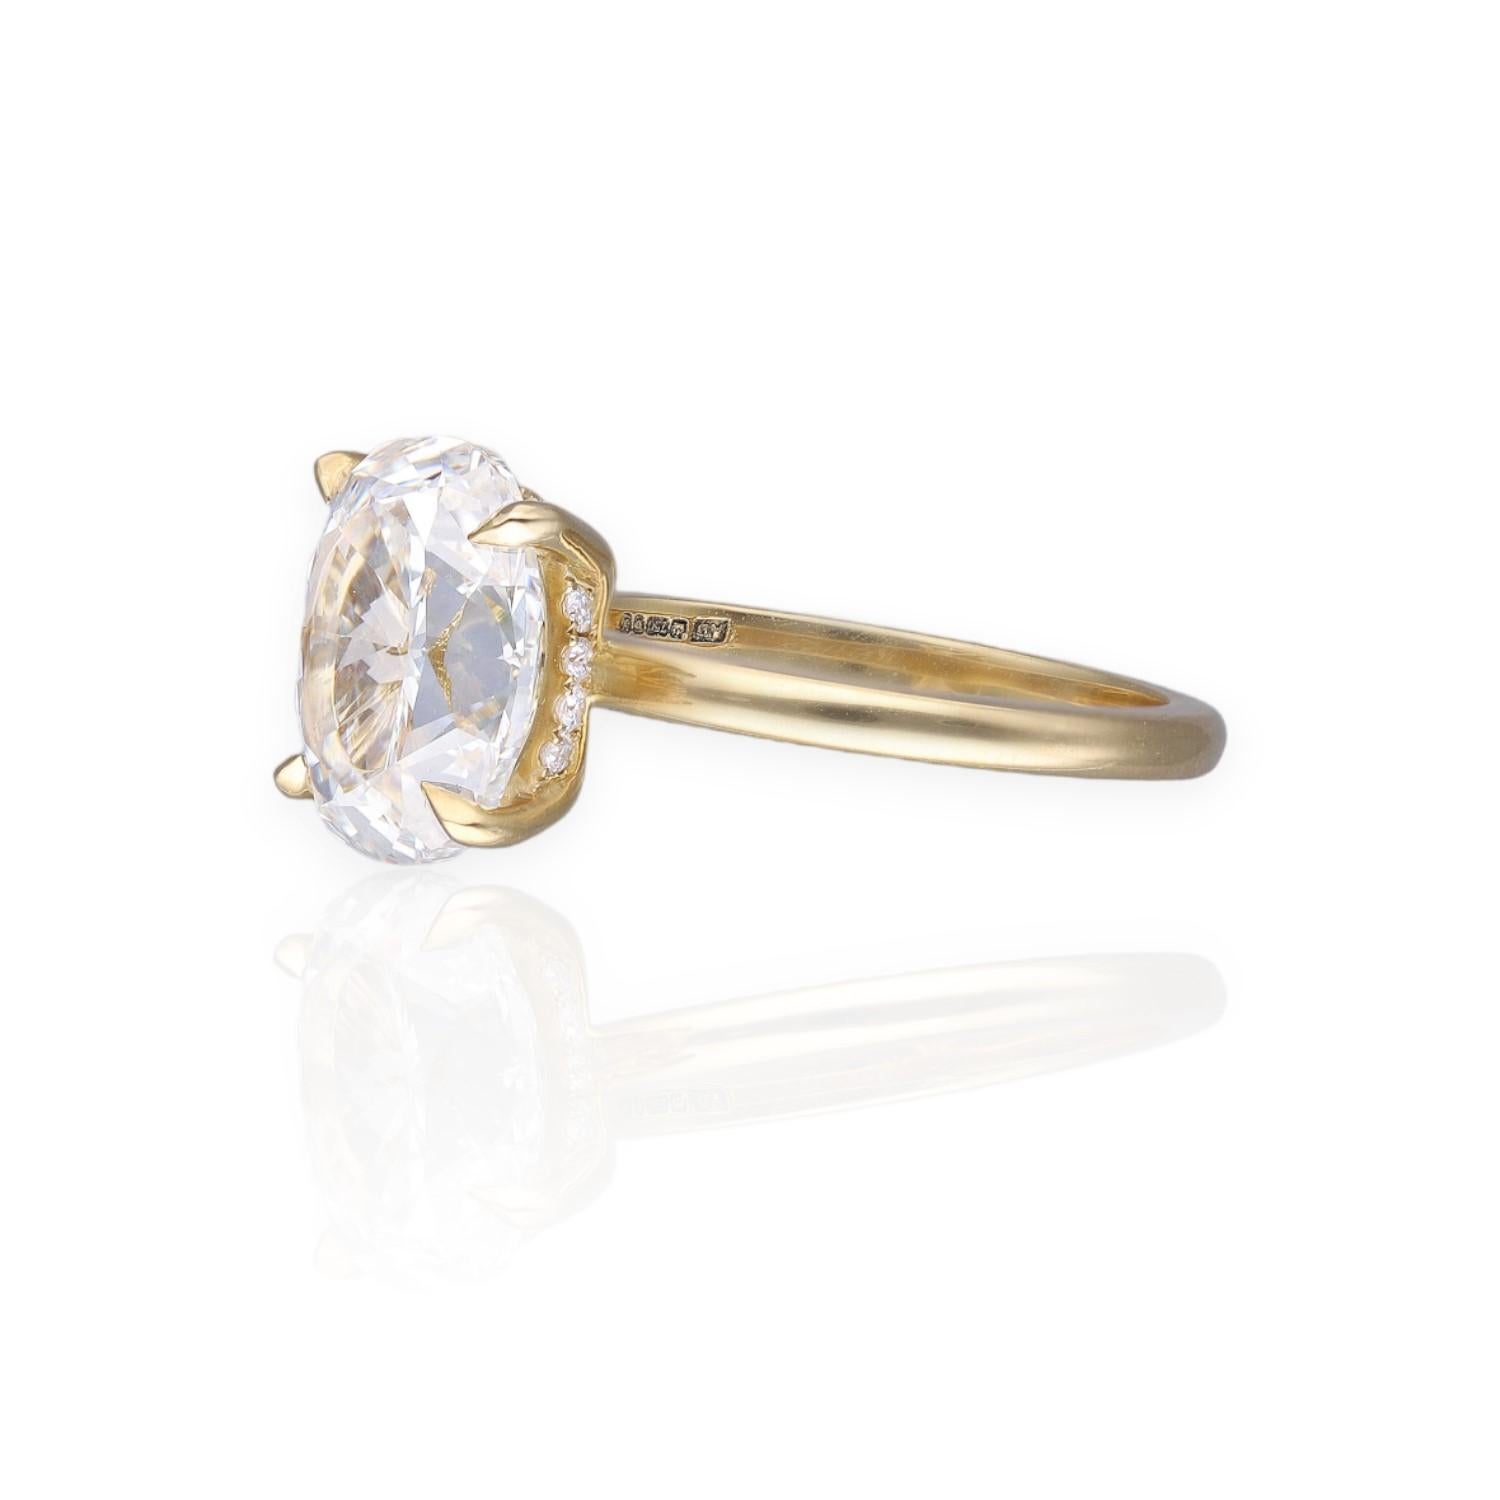 Solitare Oval diamond ring 4.01cts 
G colour VS1 clarity
GIA certificate number 5222402990

Set in 18ct gold with hidden halo 0.13cts of diamonds.

Please take a look at our other listings for similar pieces.

We can remake the ring to your